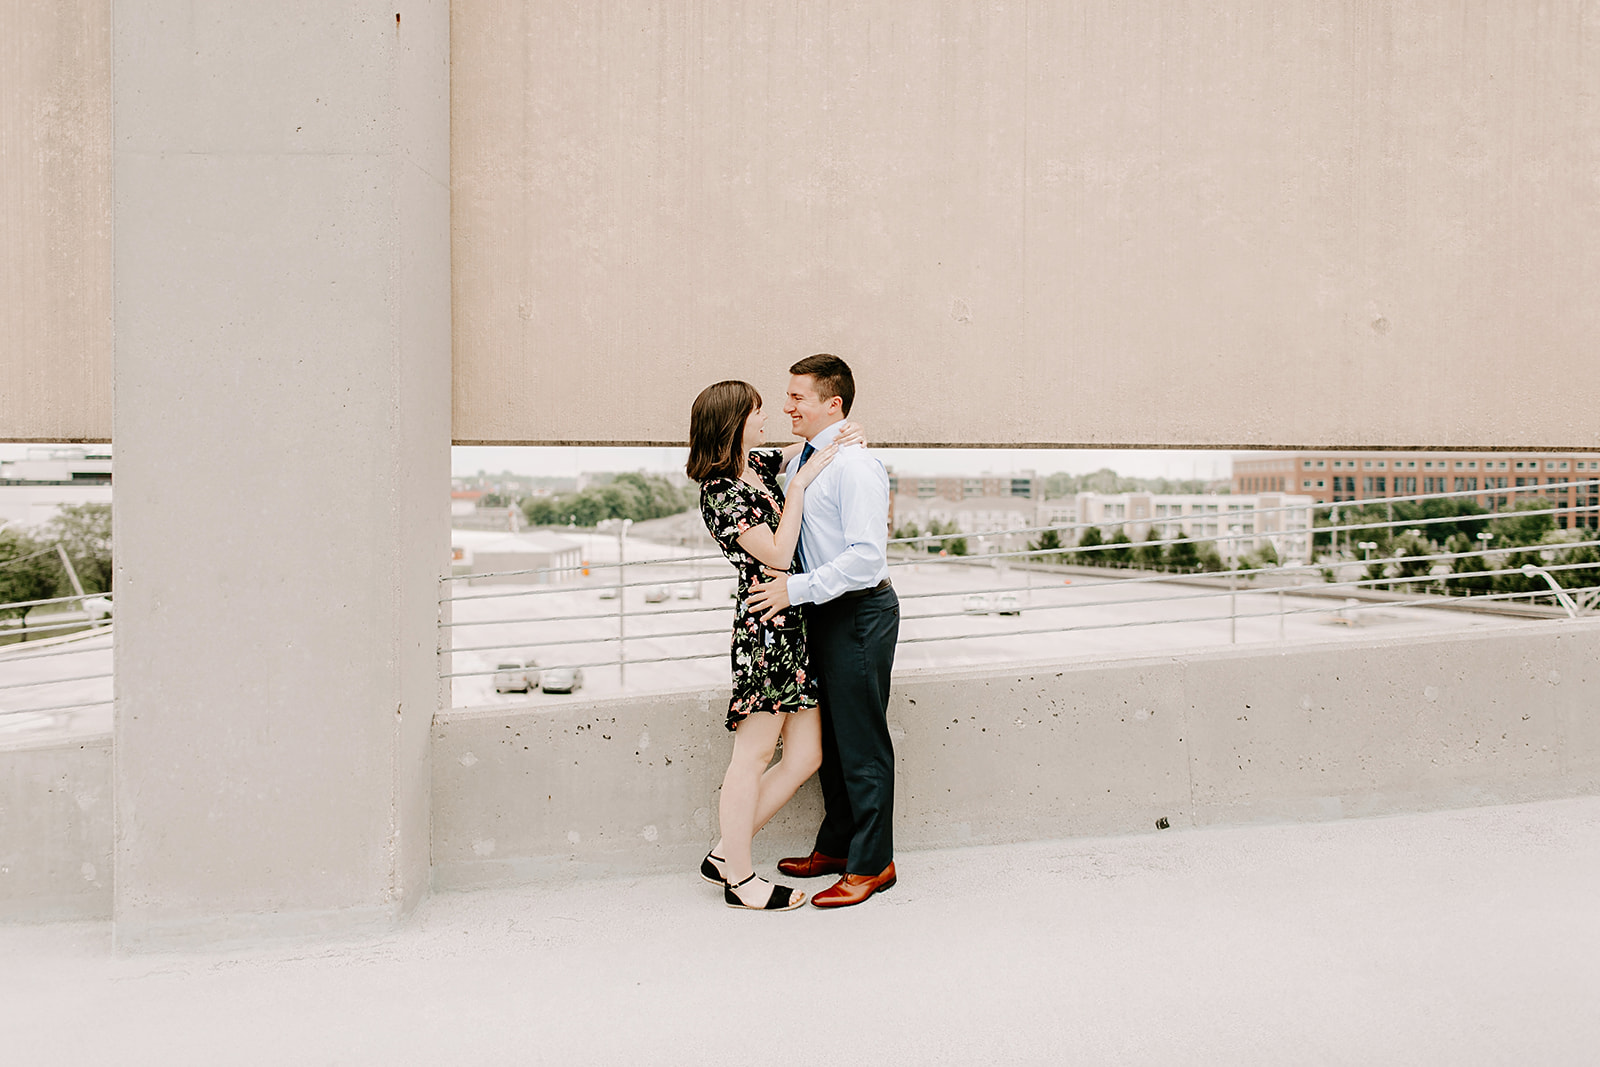   Click to browse the blog of this Downtown Indianapolis Engagement Session with Emily and Davis by Emily Wehner, Indianapolis photographer. Posing inspiration | Couples session location ideas | Urban engagement session #photography #engagementphotog